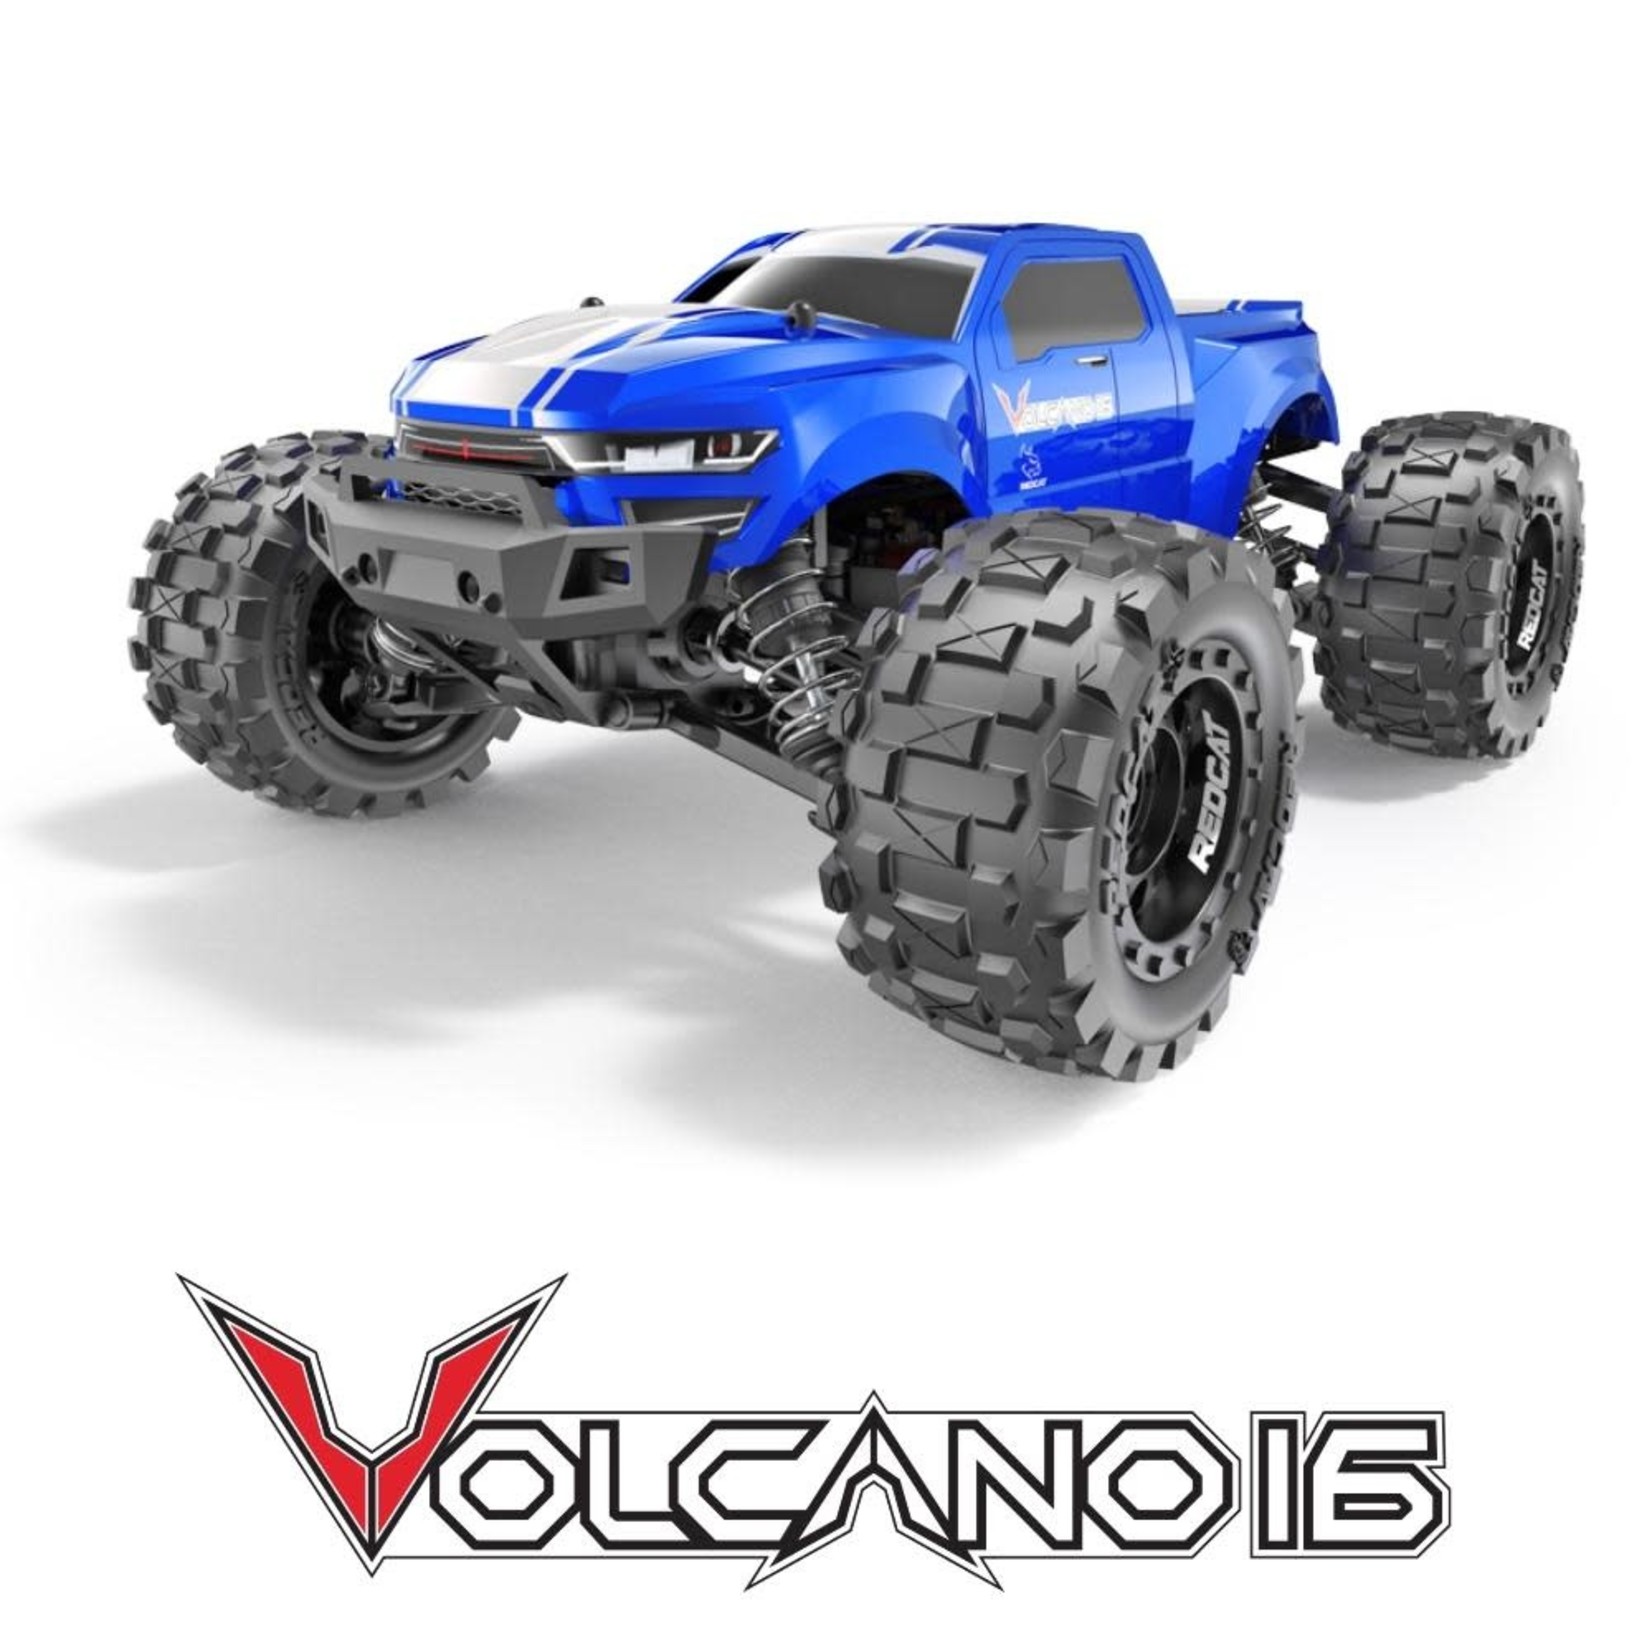 Redcat Racing 1/16 Volcano-16 Monster Truck 4x4 RTR w/ Battery and charger